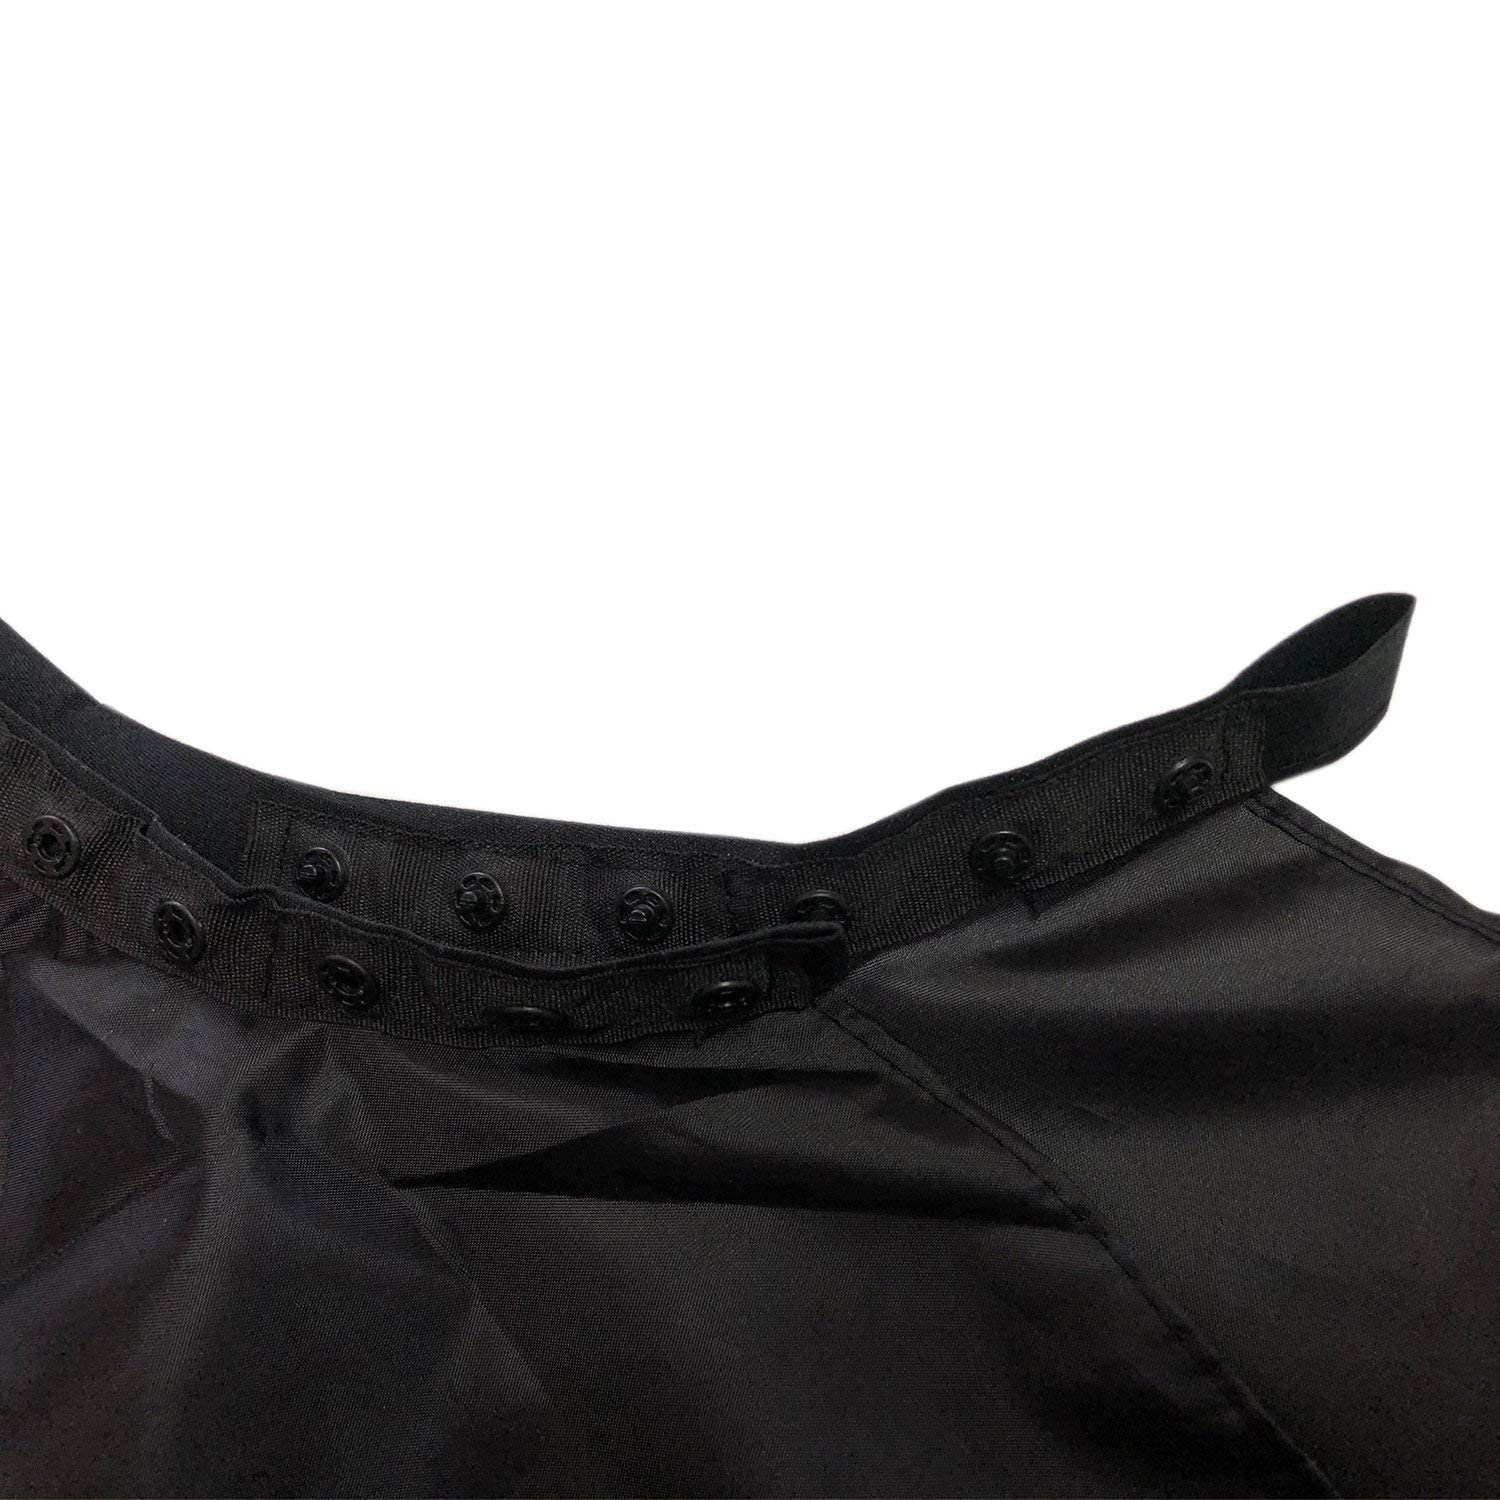 VETUZA Professional Barber Cape, Waterproof Salon Cape with Snap Closure for Hair Cutting, Black 59